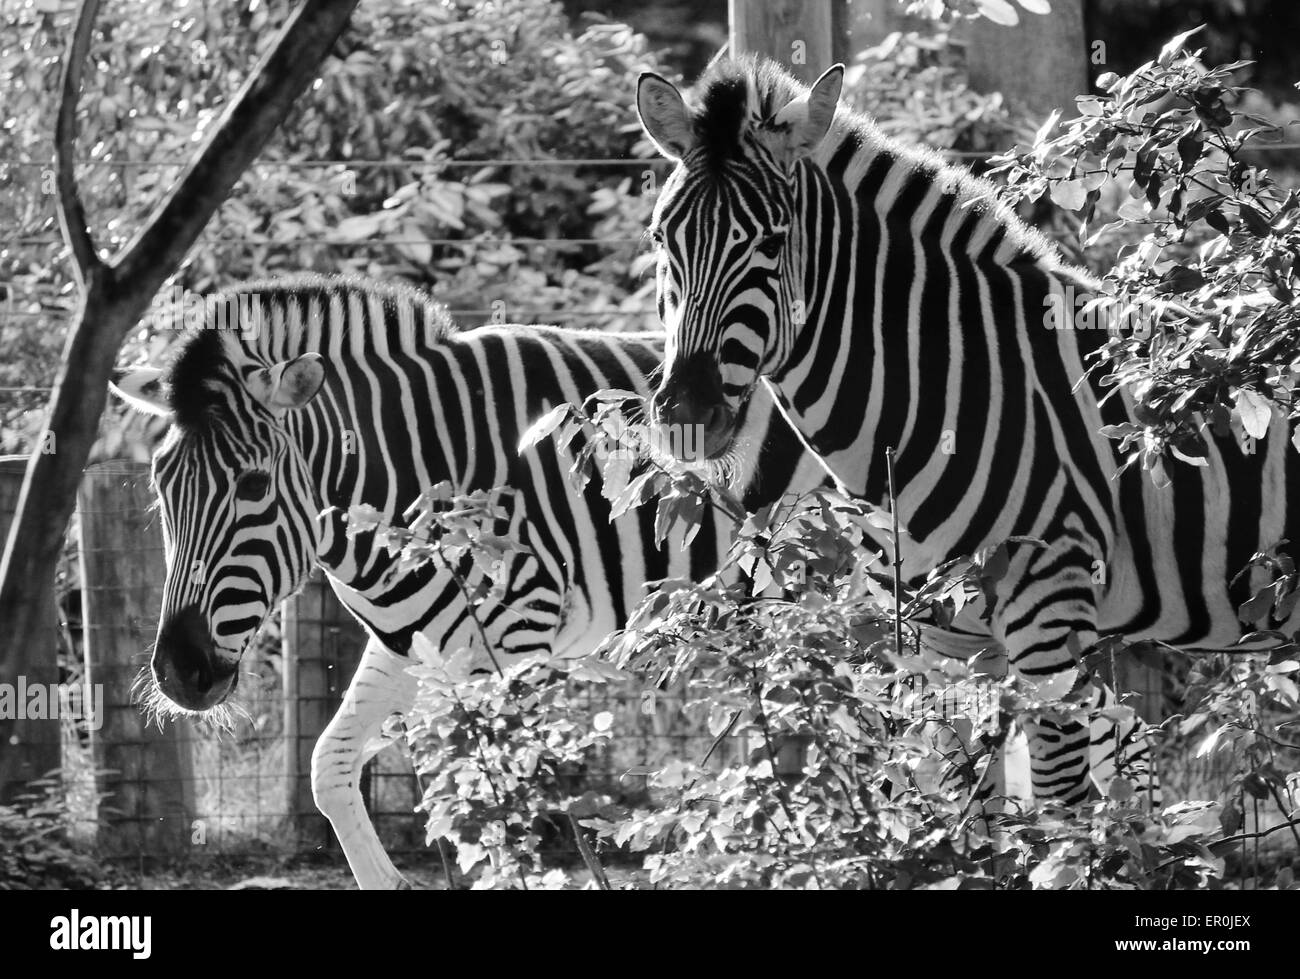 zebra in compound at zoo Stock Photo